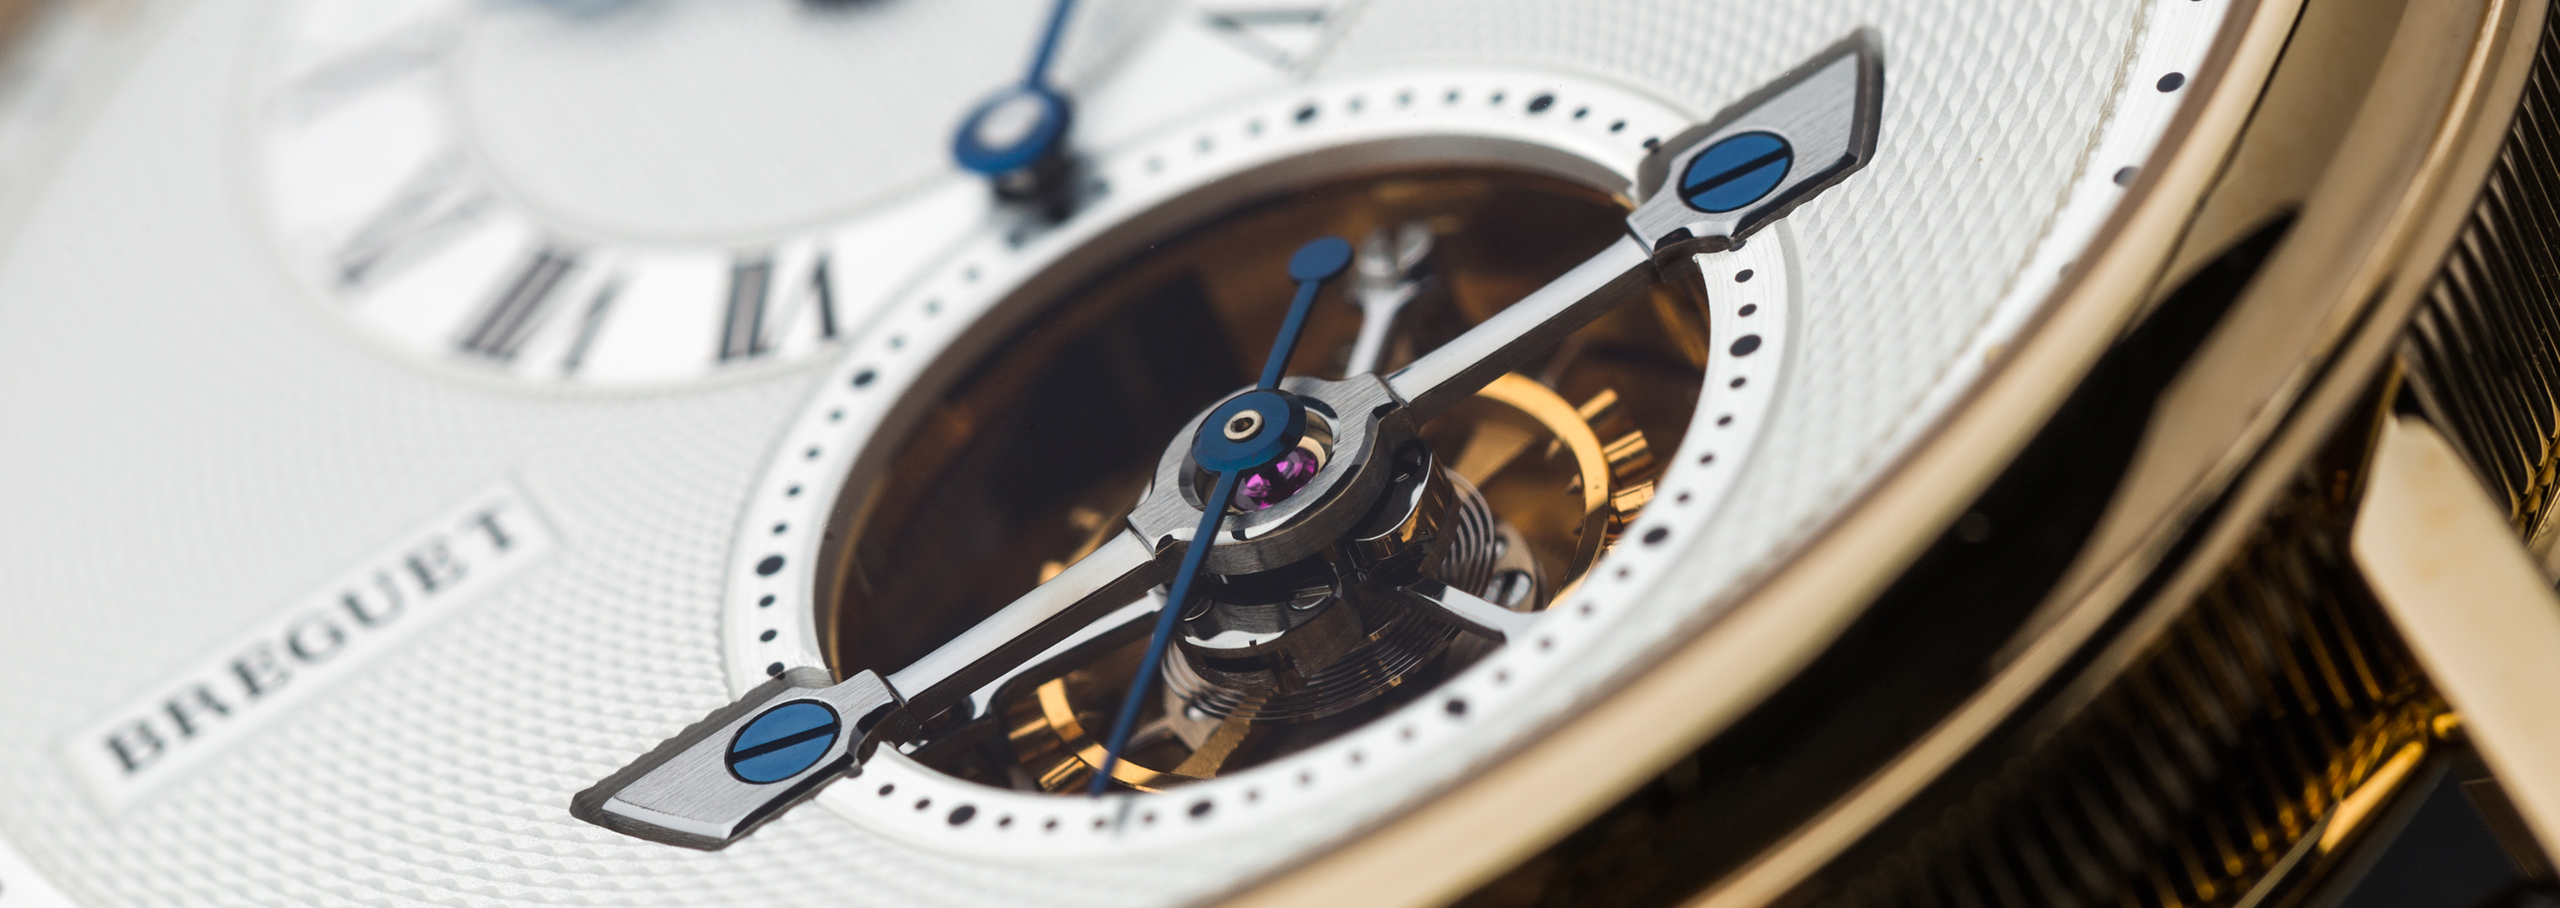 Watch With Tourbillon Complication: Timekeeping at Its Finest.